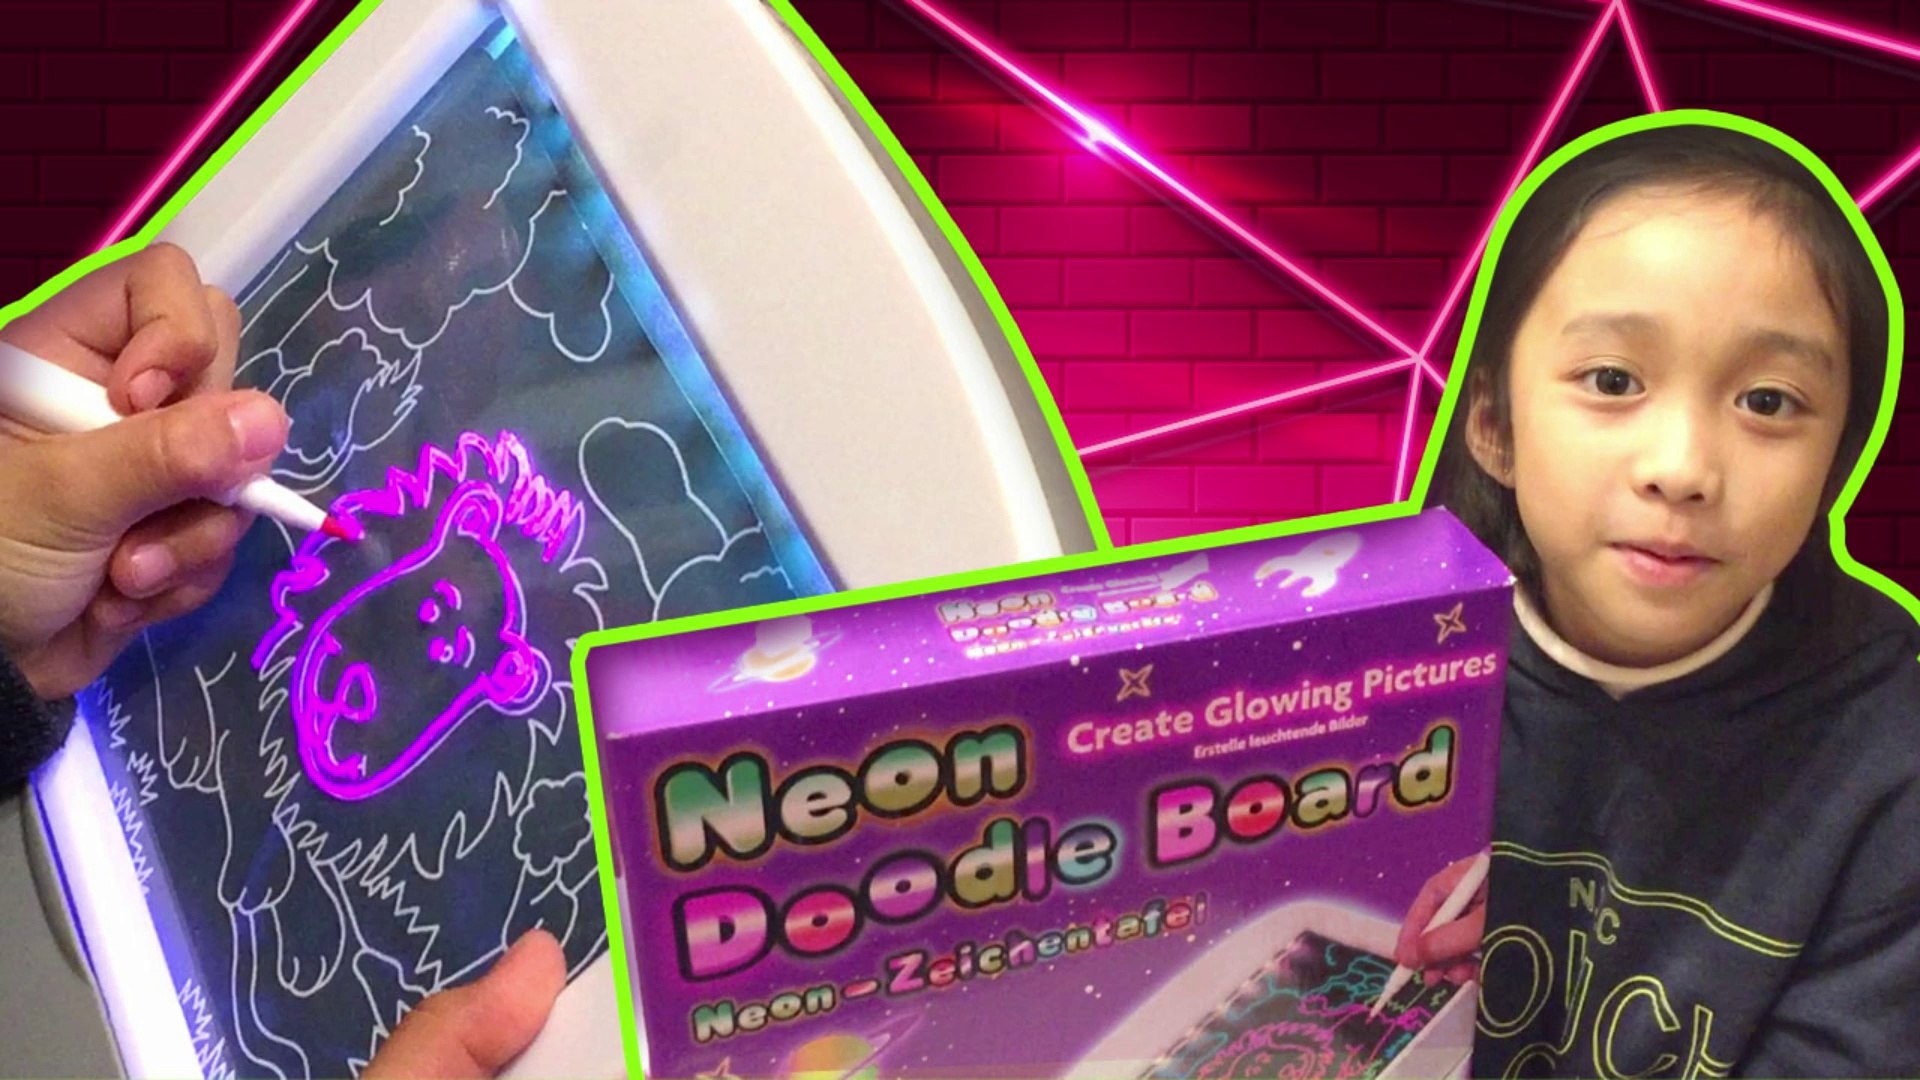 Neon Glow Doodle Board Glow In The Dark Drawing Board Glowing Art Board Video Dailymotion Unbox, build, and battle in the dark with the new 5 surprise dino strike glow in the dark ! neon glow doodle board glow in the dark drawing board glowing art board